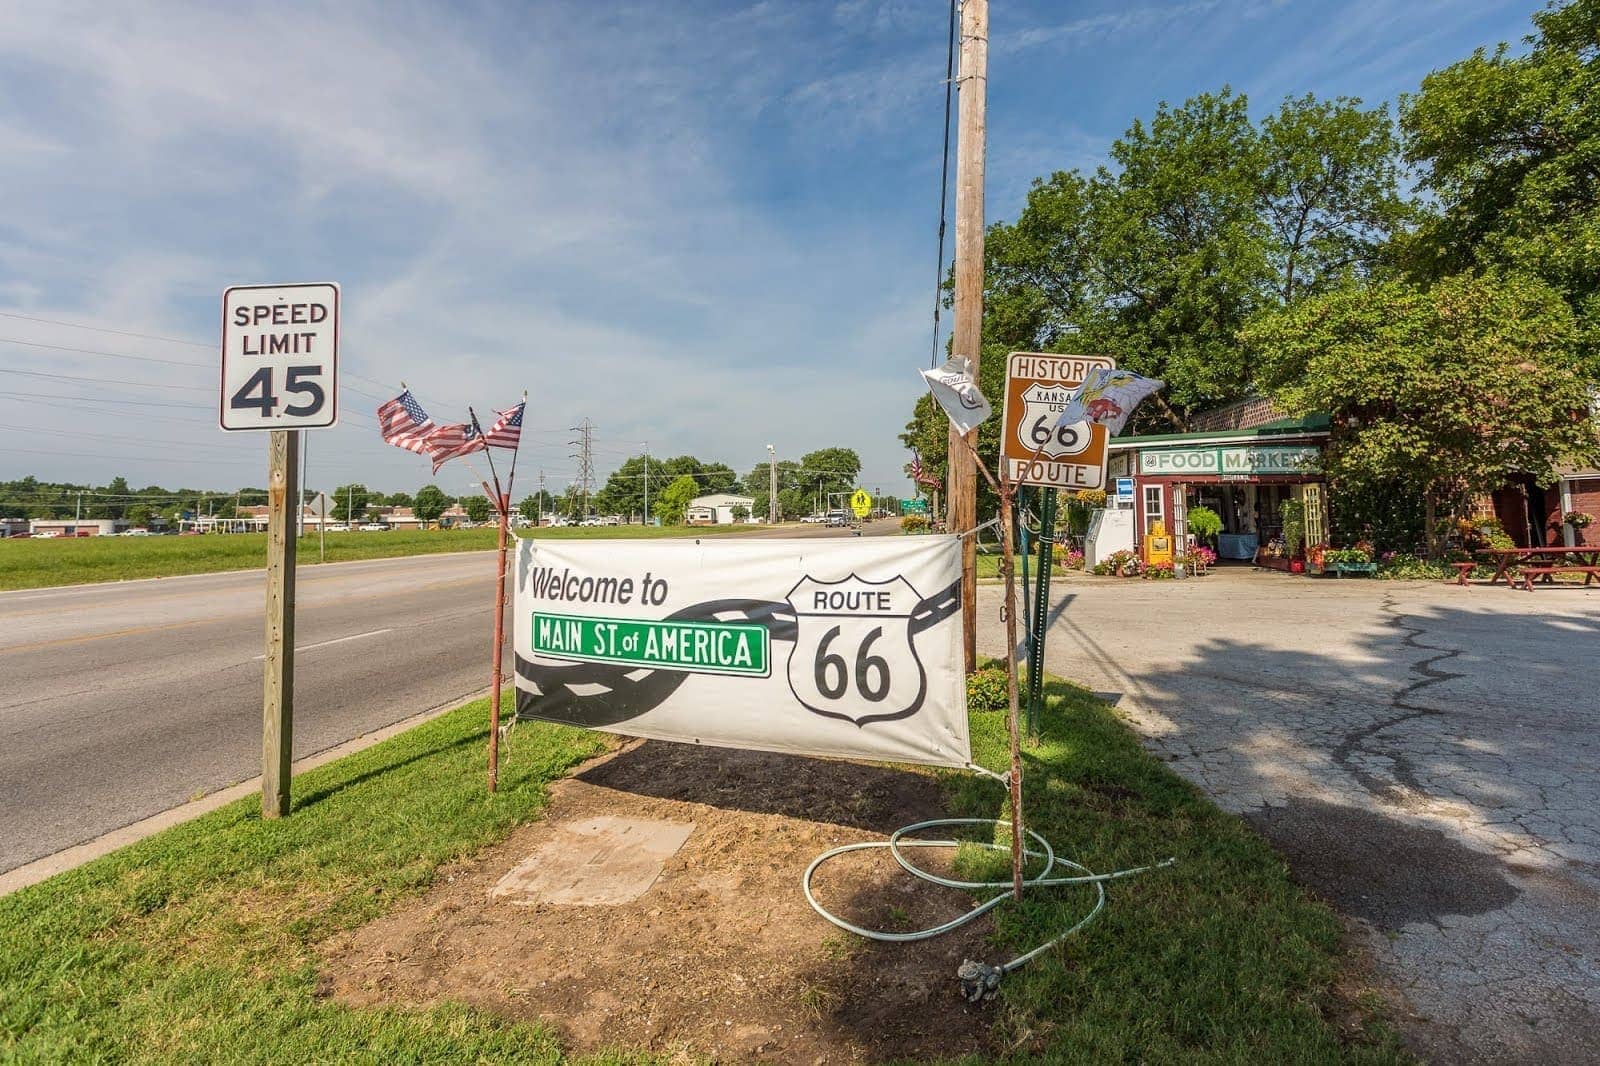 Route 66 in Kansas - All the highlights!